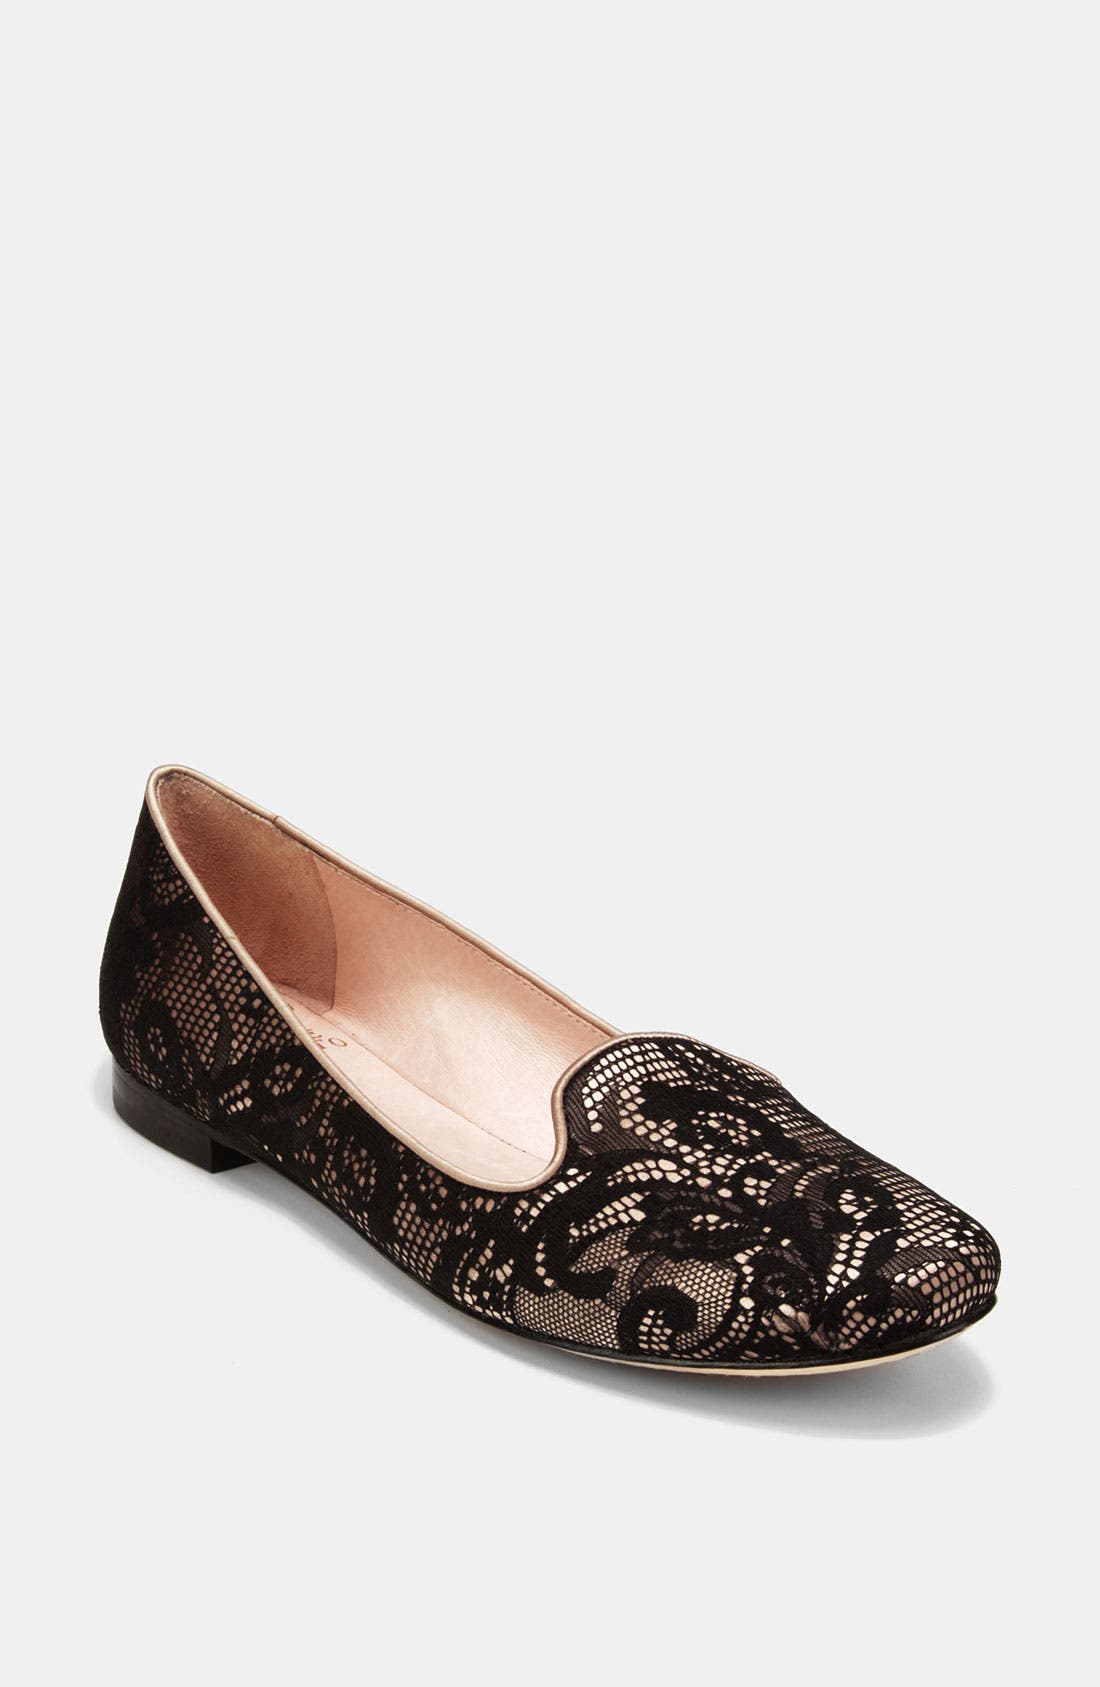 Vince Camuto 'Loria' Flat | Nordstrom